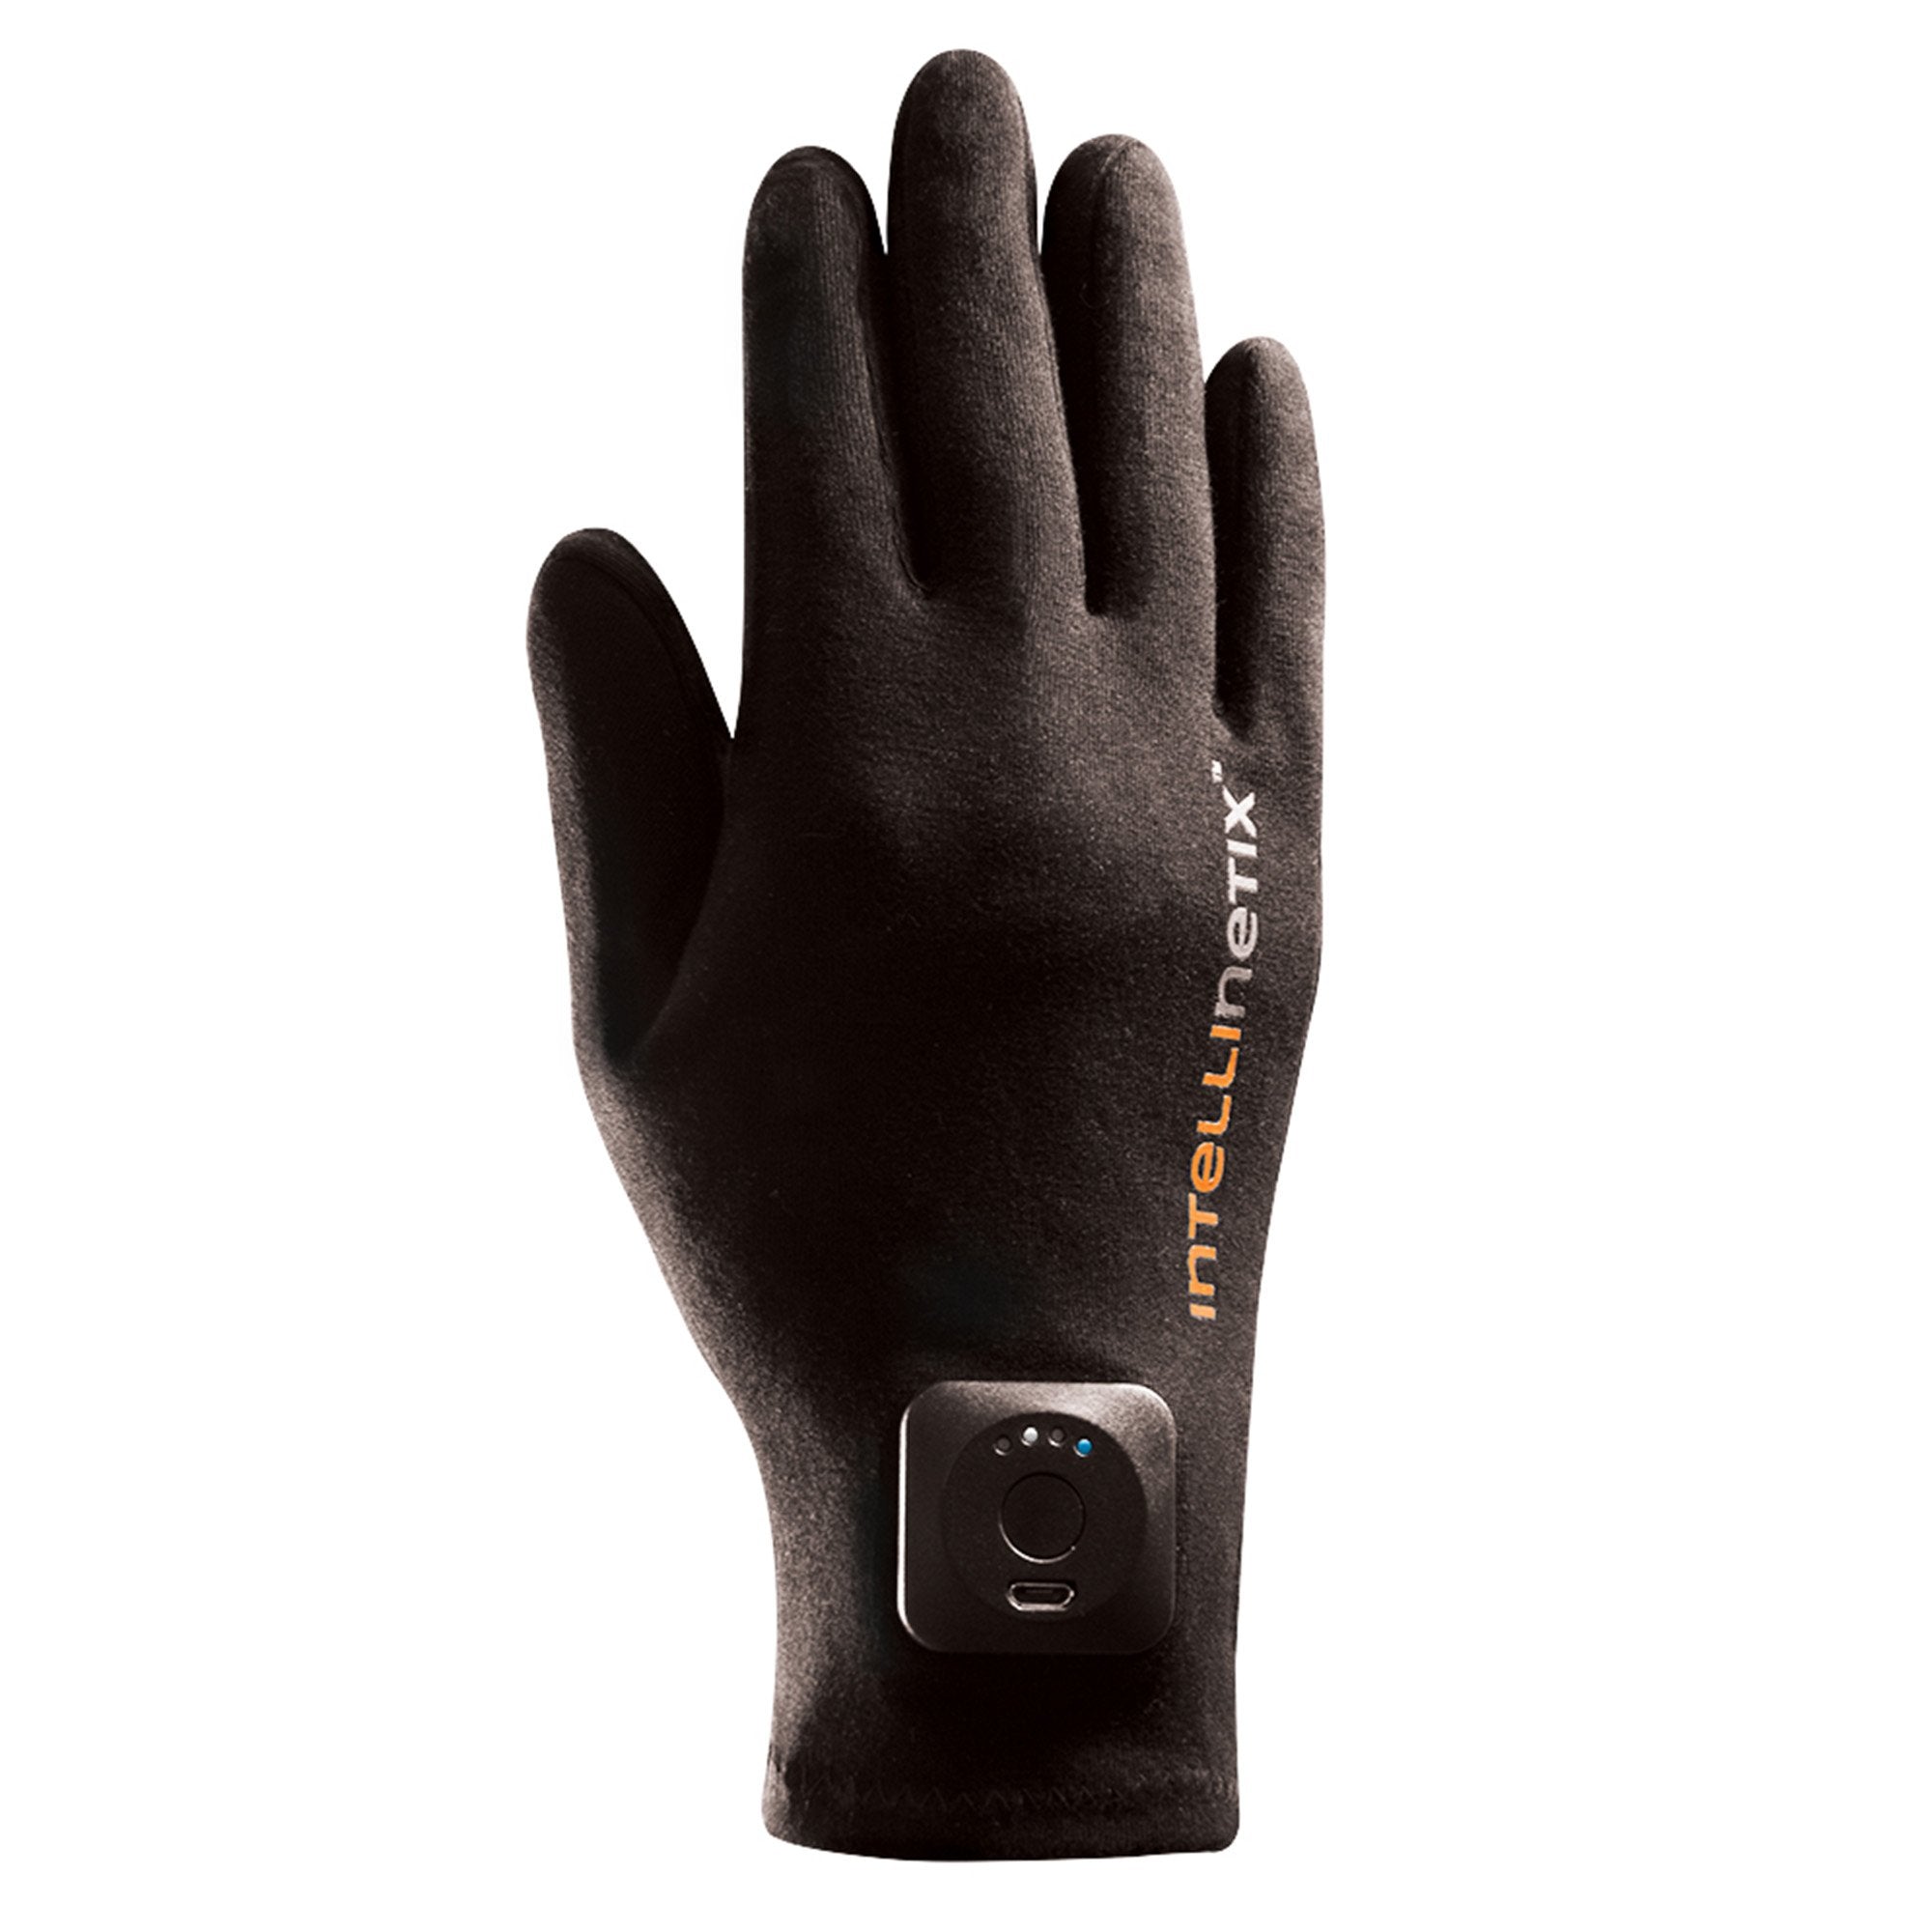 Vibration Therapy Glove Intellinetix Left and Right Hand Large